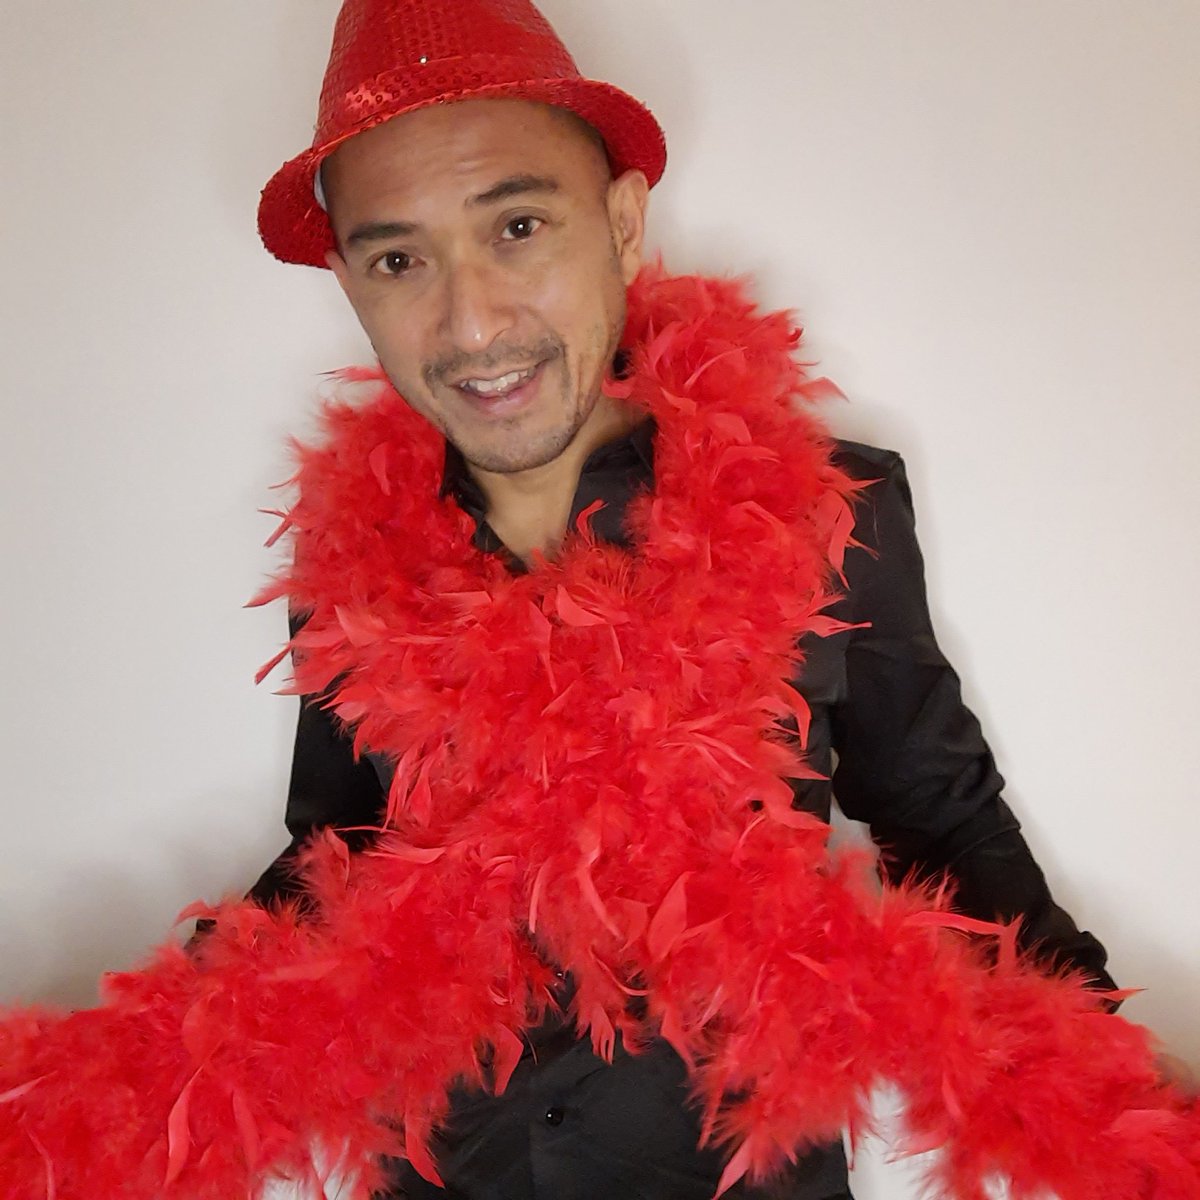 On this #WorldAidsDay2021 I'm wearing a red feather boa because:
✅13 years living with #HIV
✅#Undetectable 
✅#UequalsU
✅Feeling fabulous 
I owe this to HIV campaigners before me & honour those who died too young and/or unable to access treatment🕯❤
#WAD2021 #WorldAIDsDay21